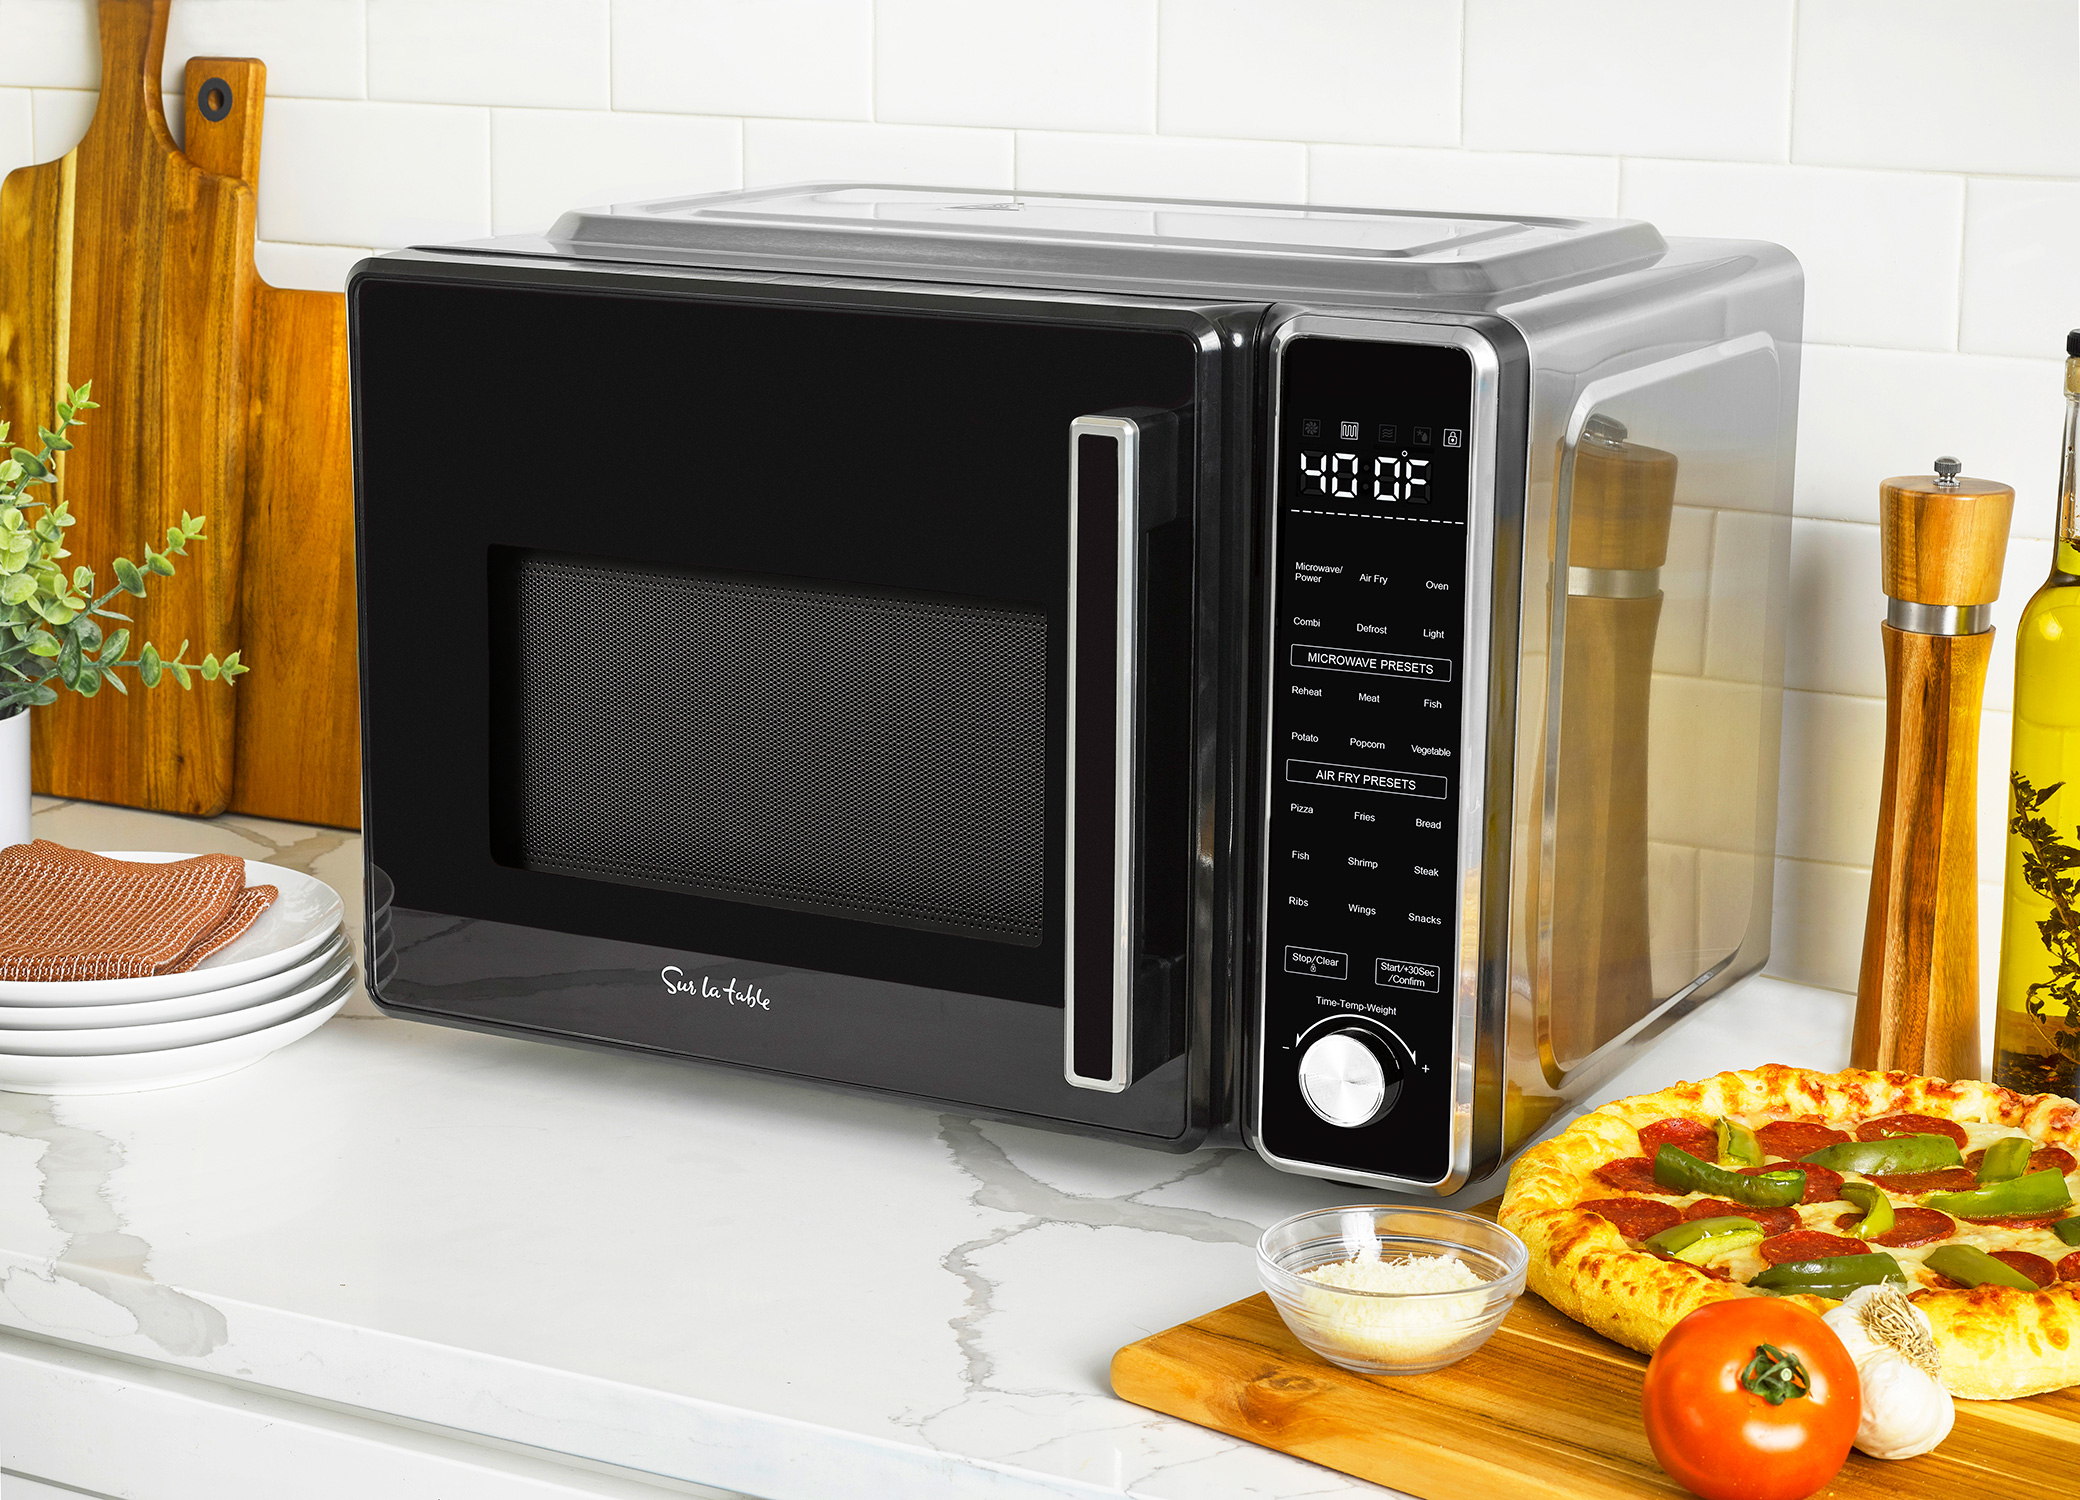 Microwave Air Fryer Oven with Advanced Inverter Technology – .82